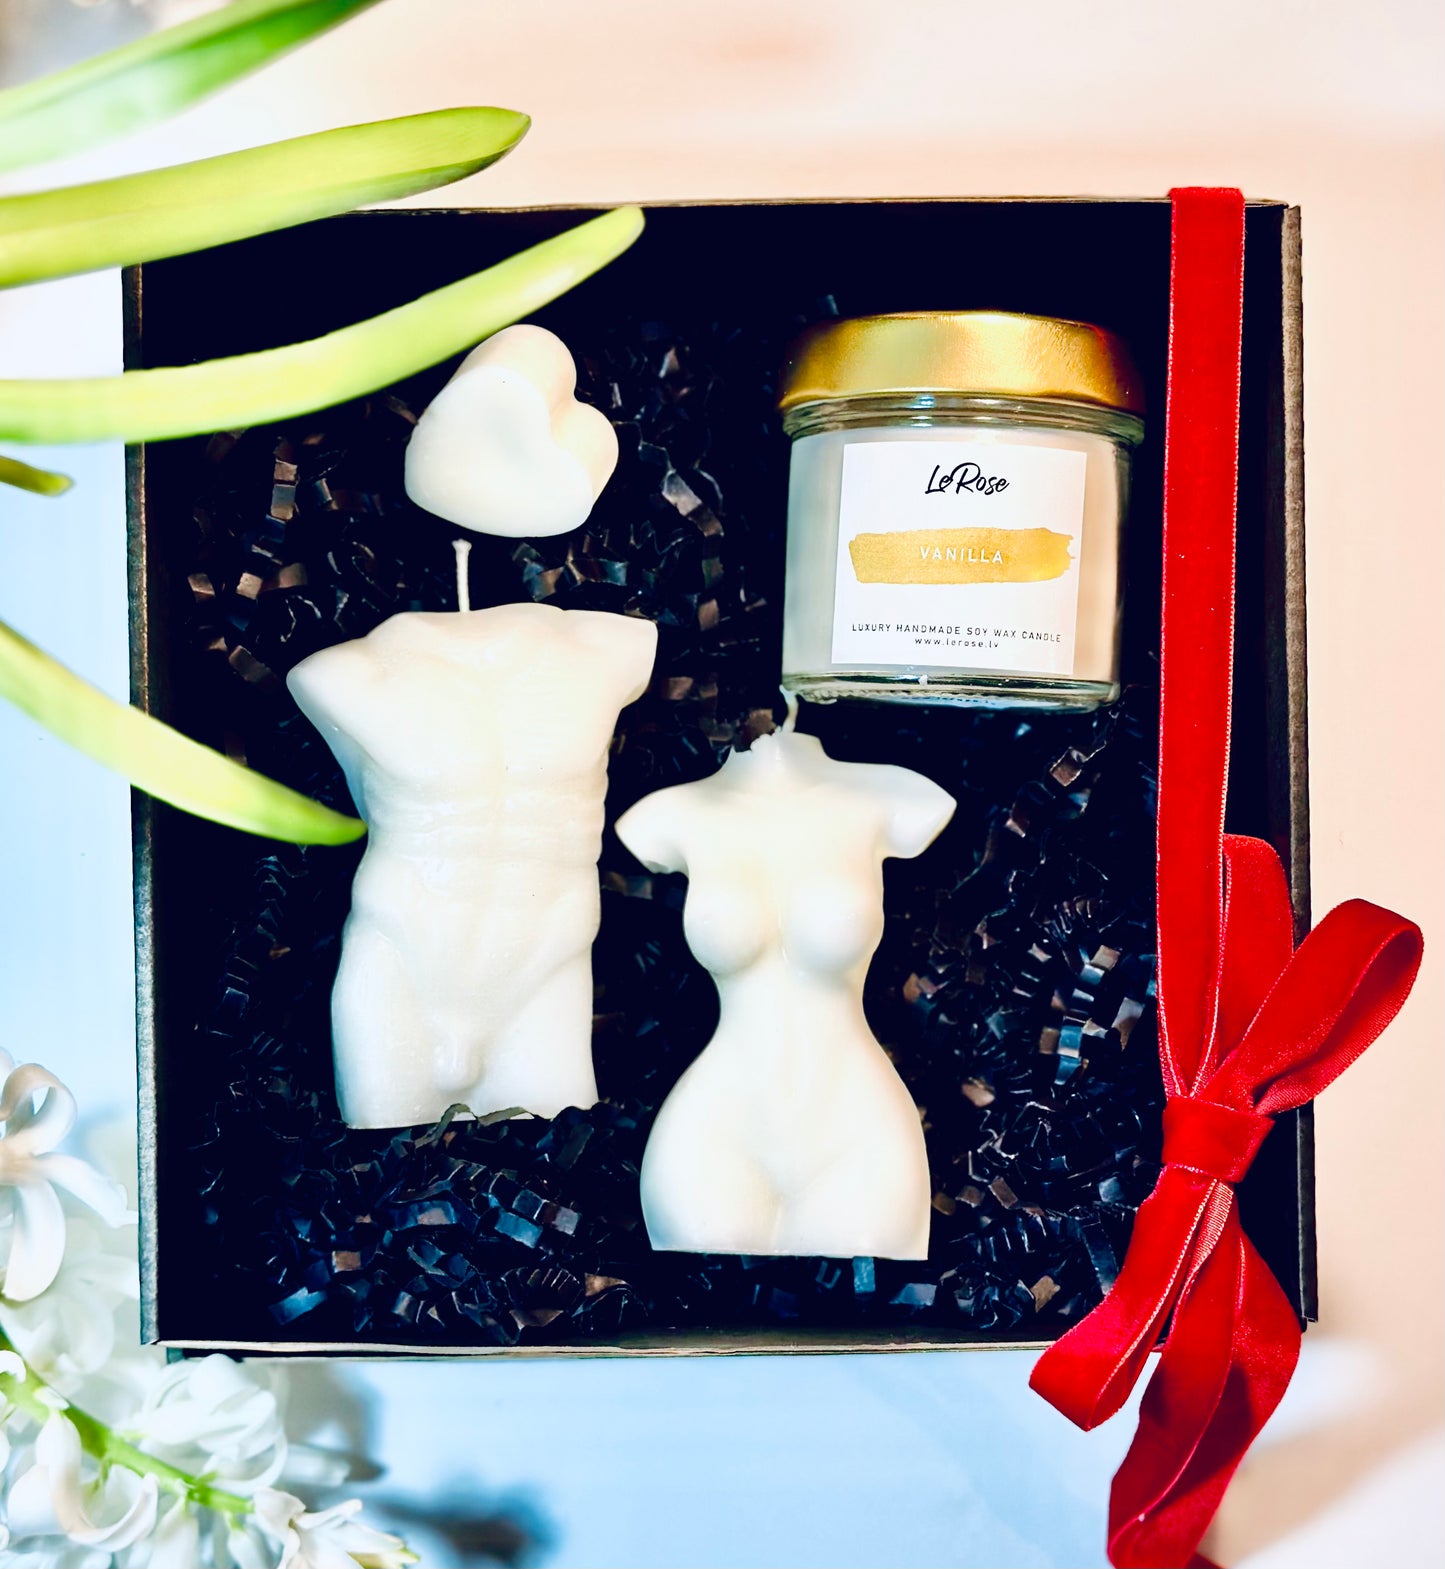 A touch of vanilla gift set